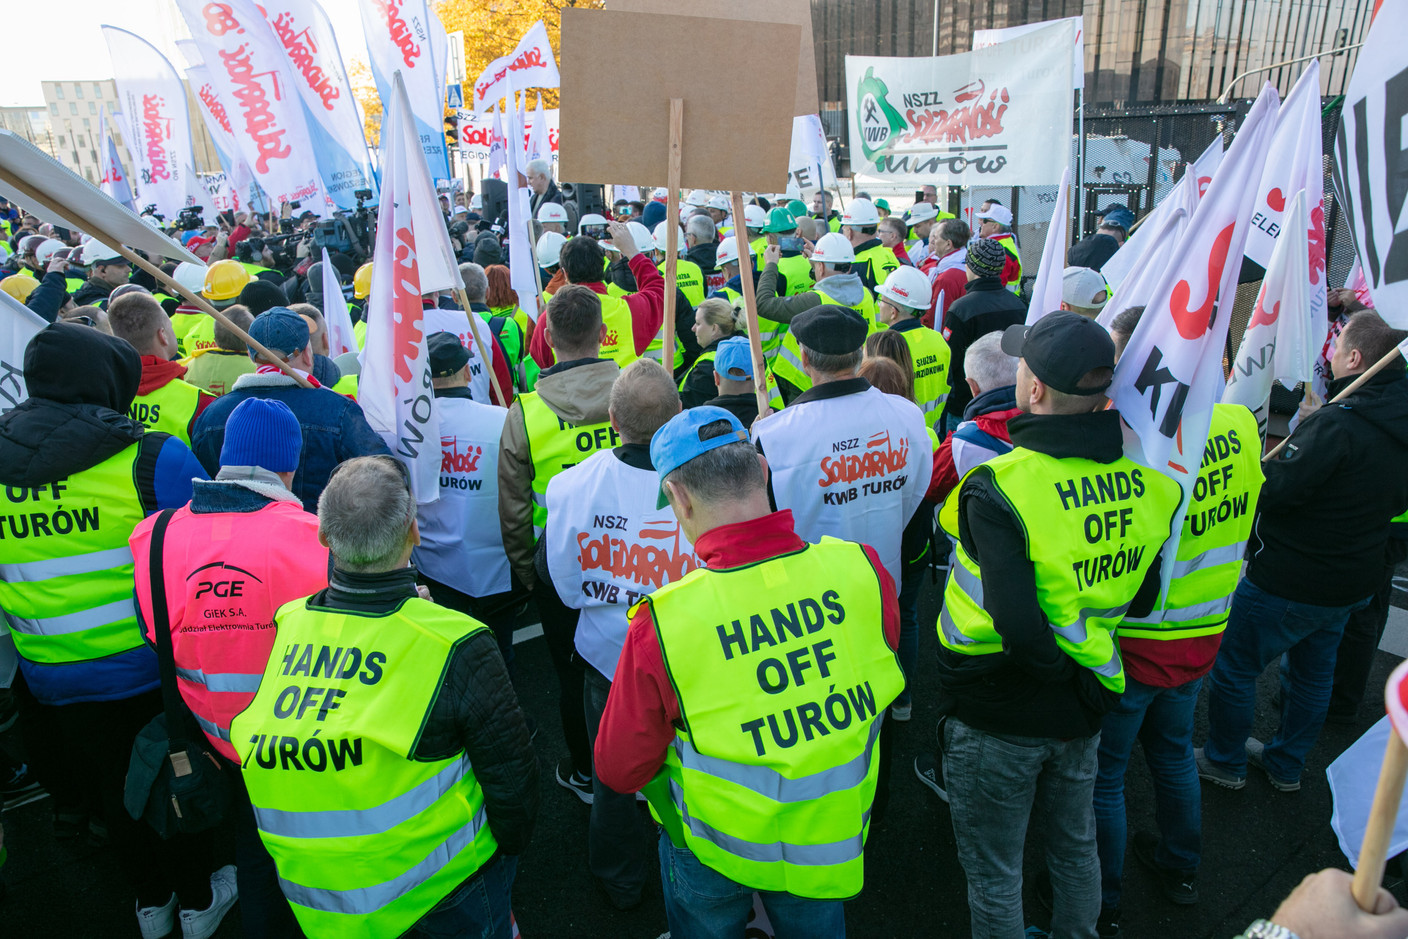 The protest took place in Kirchberg. (Photo: Romain Gamba / Maison Moderne)